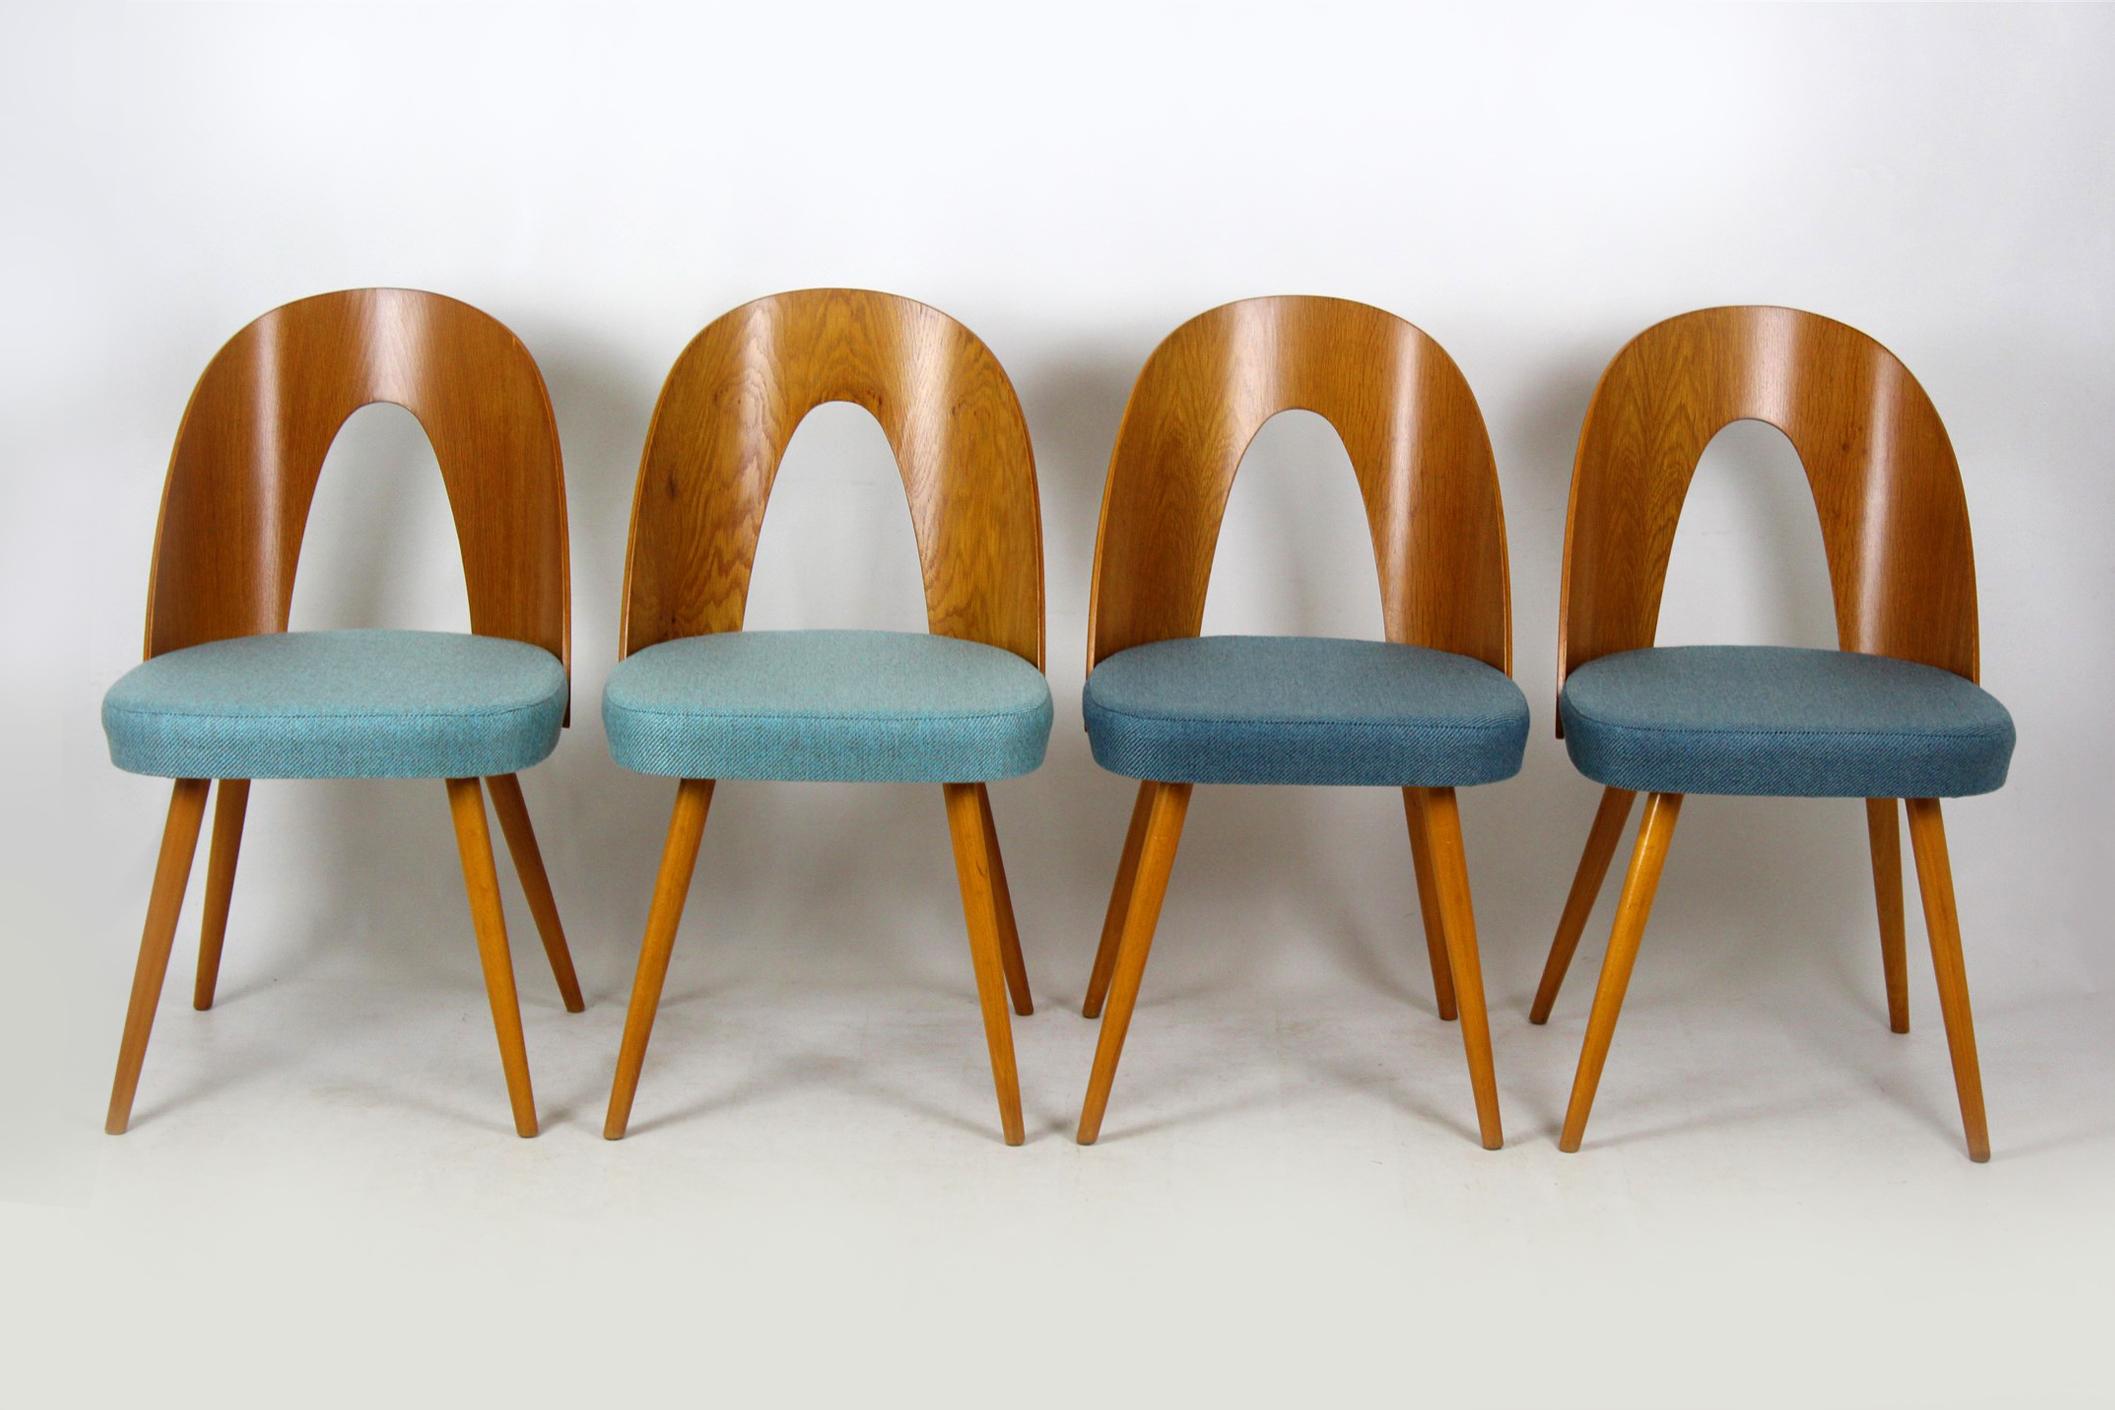 Set of four chairs designed by Antonin Suman circa 1960 and produced in former Czechoslovakia. 
Made of lacquered plywood with ash veneer. Seats upholstered with new blue and turquoise fabric upholstery.